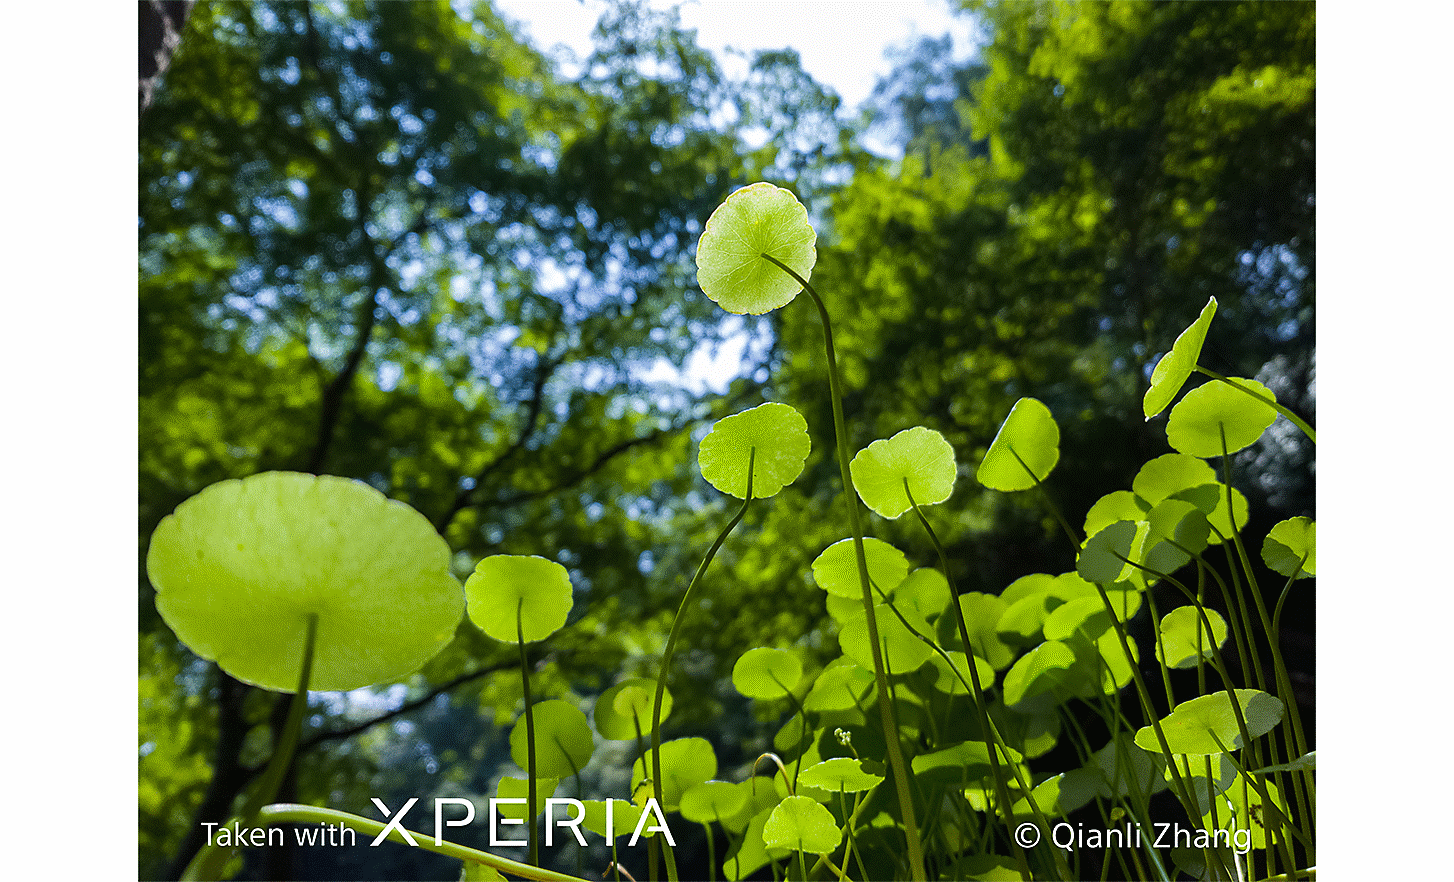 Close-up on delicate foliage in the foreground with leafy trees in the background. Text reads "Taken with XPERIA ©Qianli Zhang".